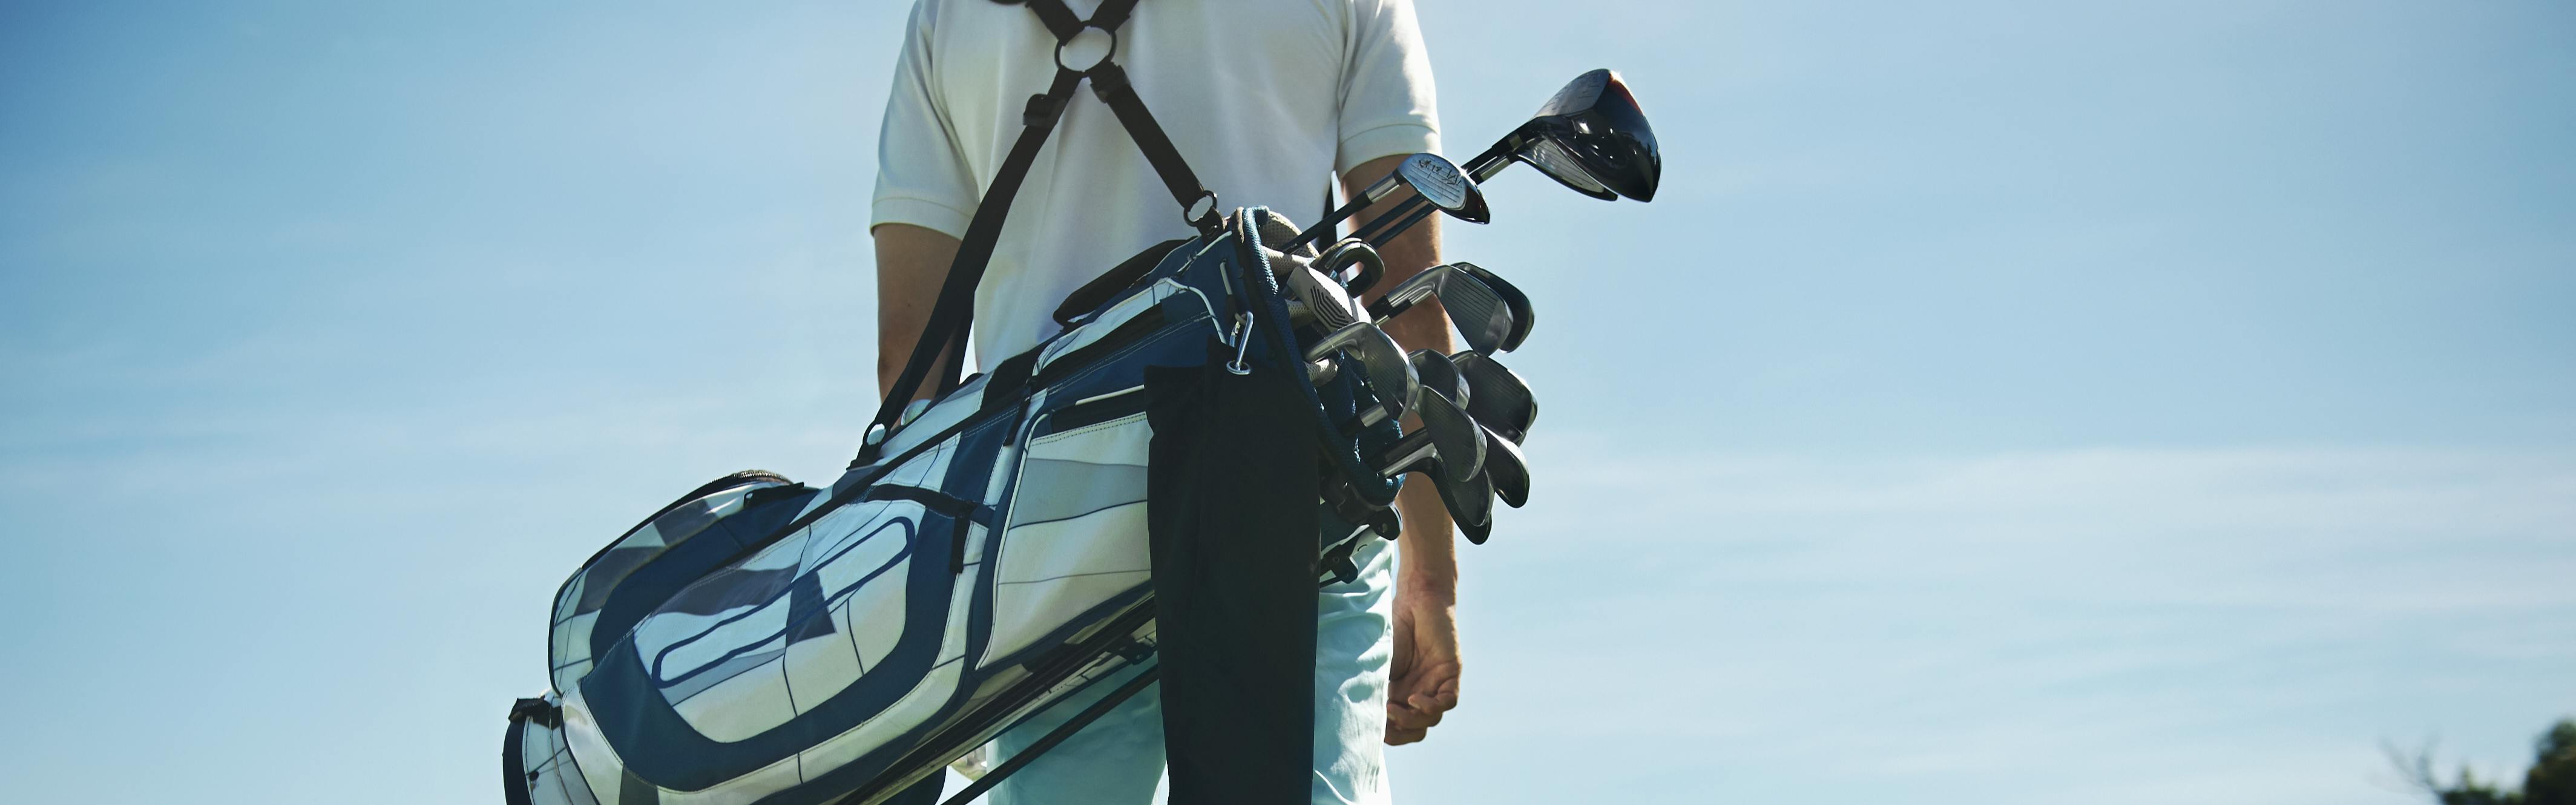 What's In Your Golf Bag? - Best Combination of Clubs - Free Online Golf Tips